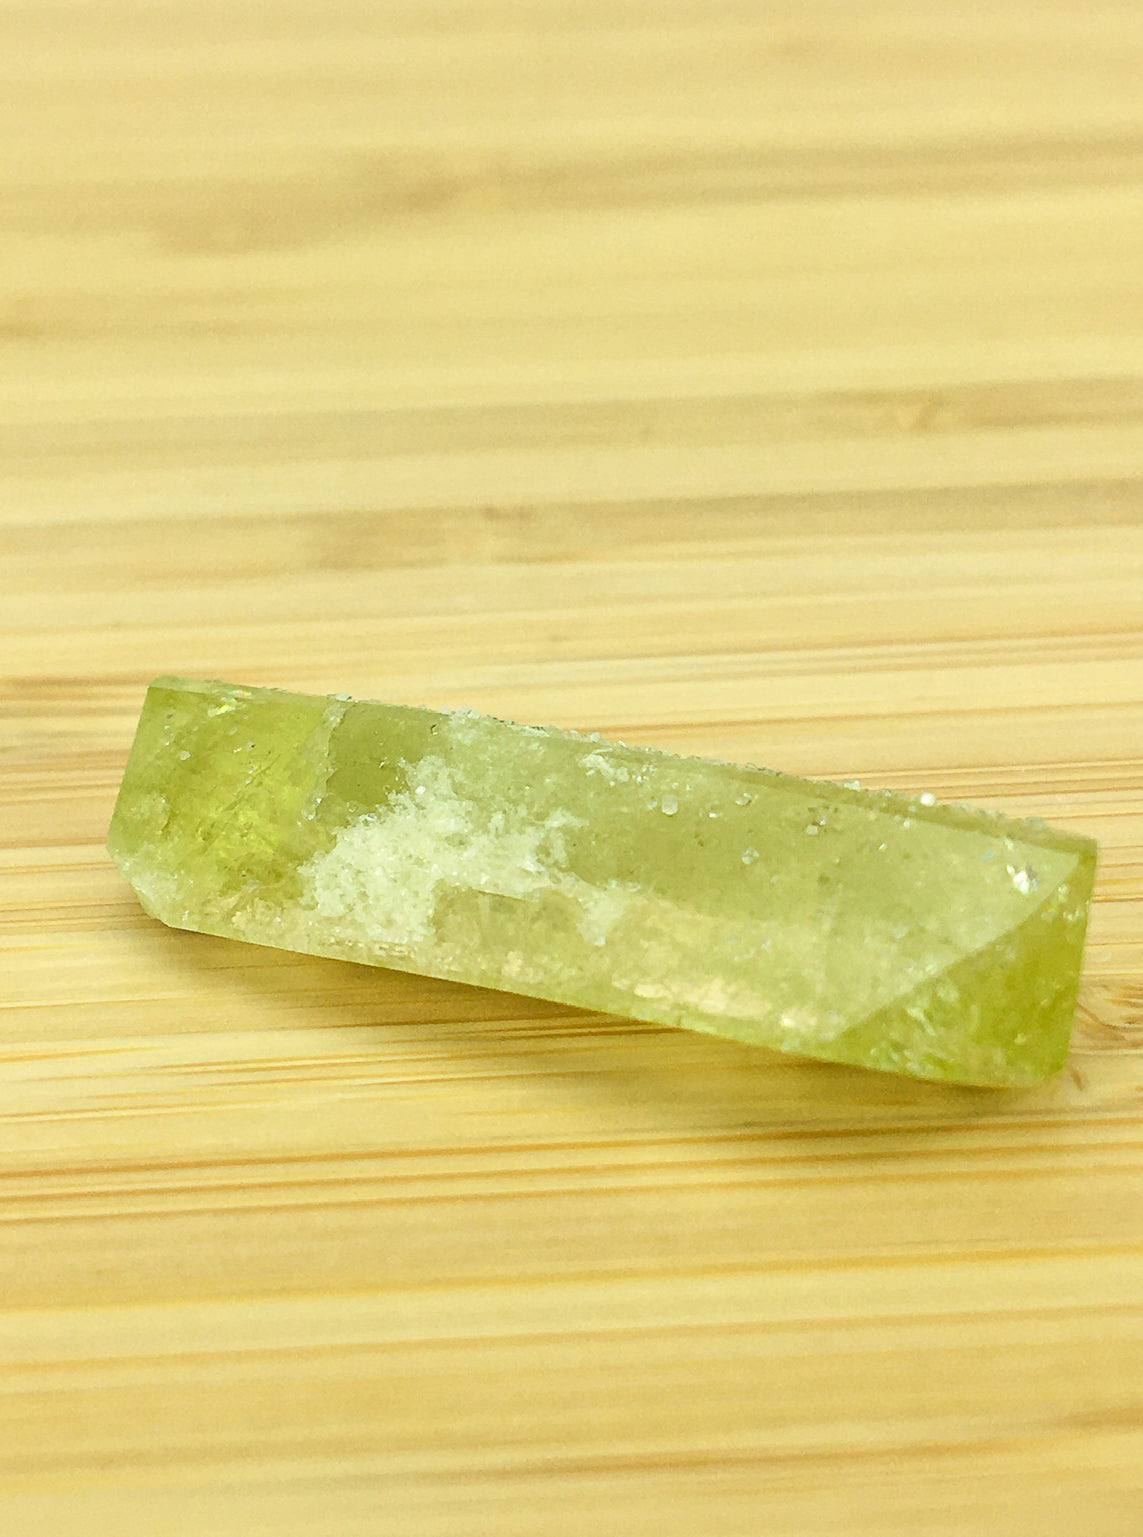 prismatic brazilianite crystal on a good grain surface. The crystal is prismatic and well formed. It is  green. It is gemmy.